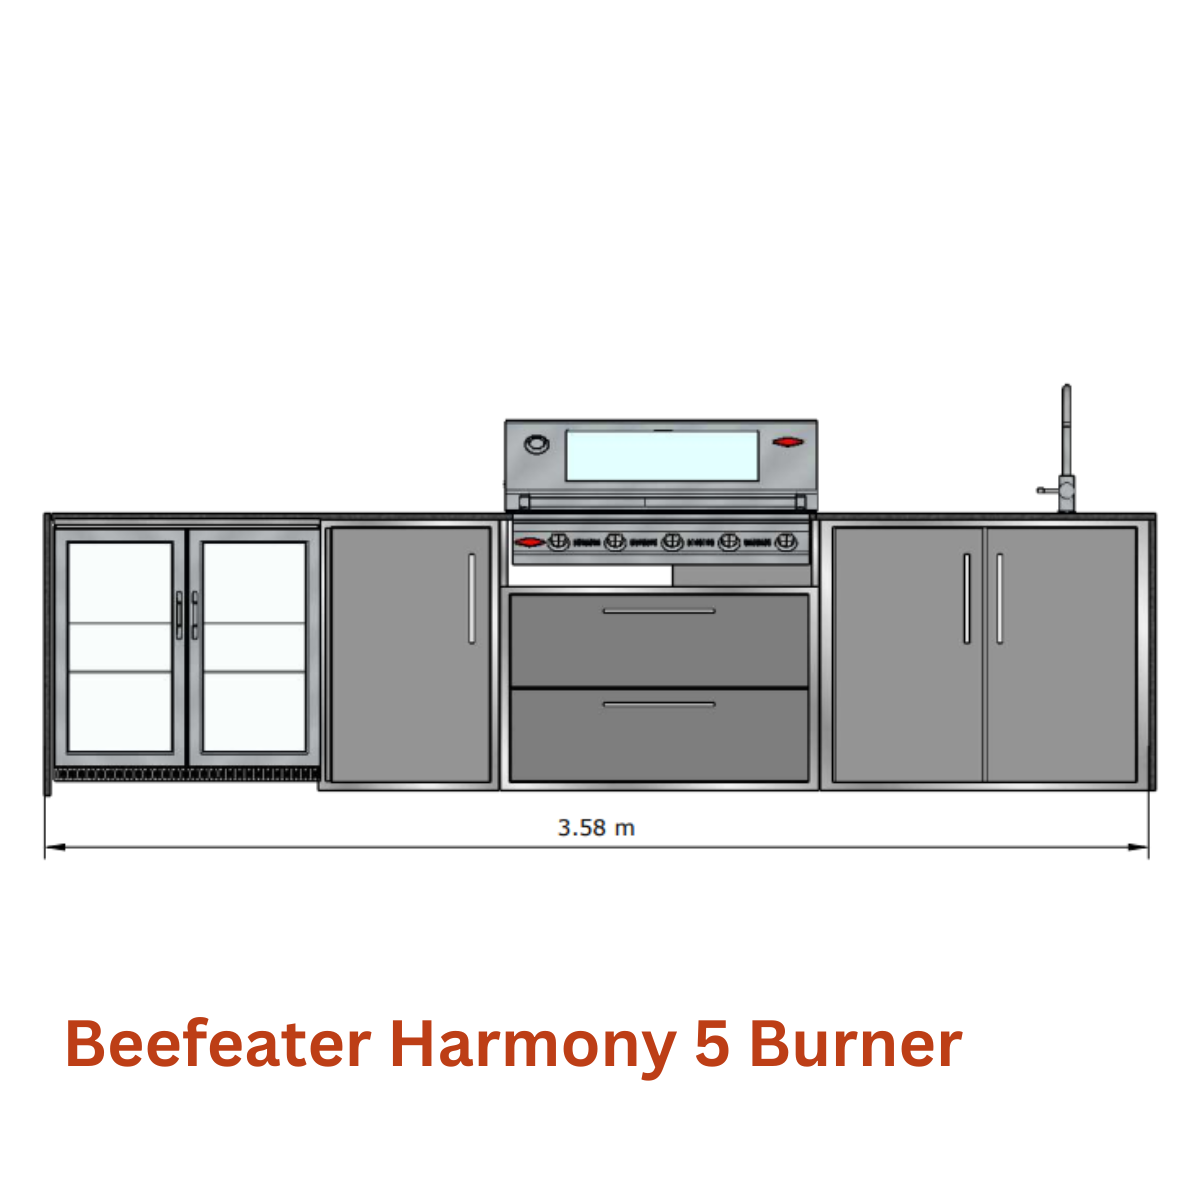 Beefeater Harmony 5 Burner Outdoor Kitchen Module - talk to Kitchen in the Garden about how this can fit into your outdoor kitchen design